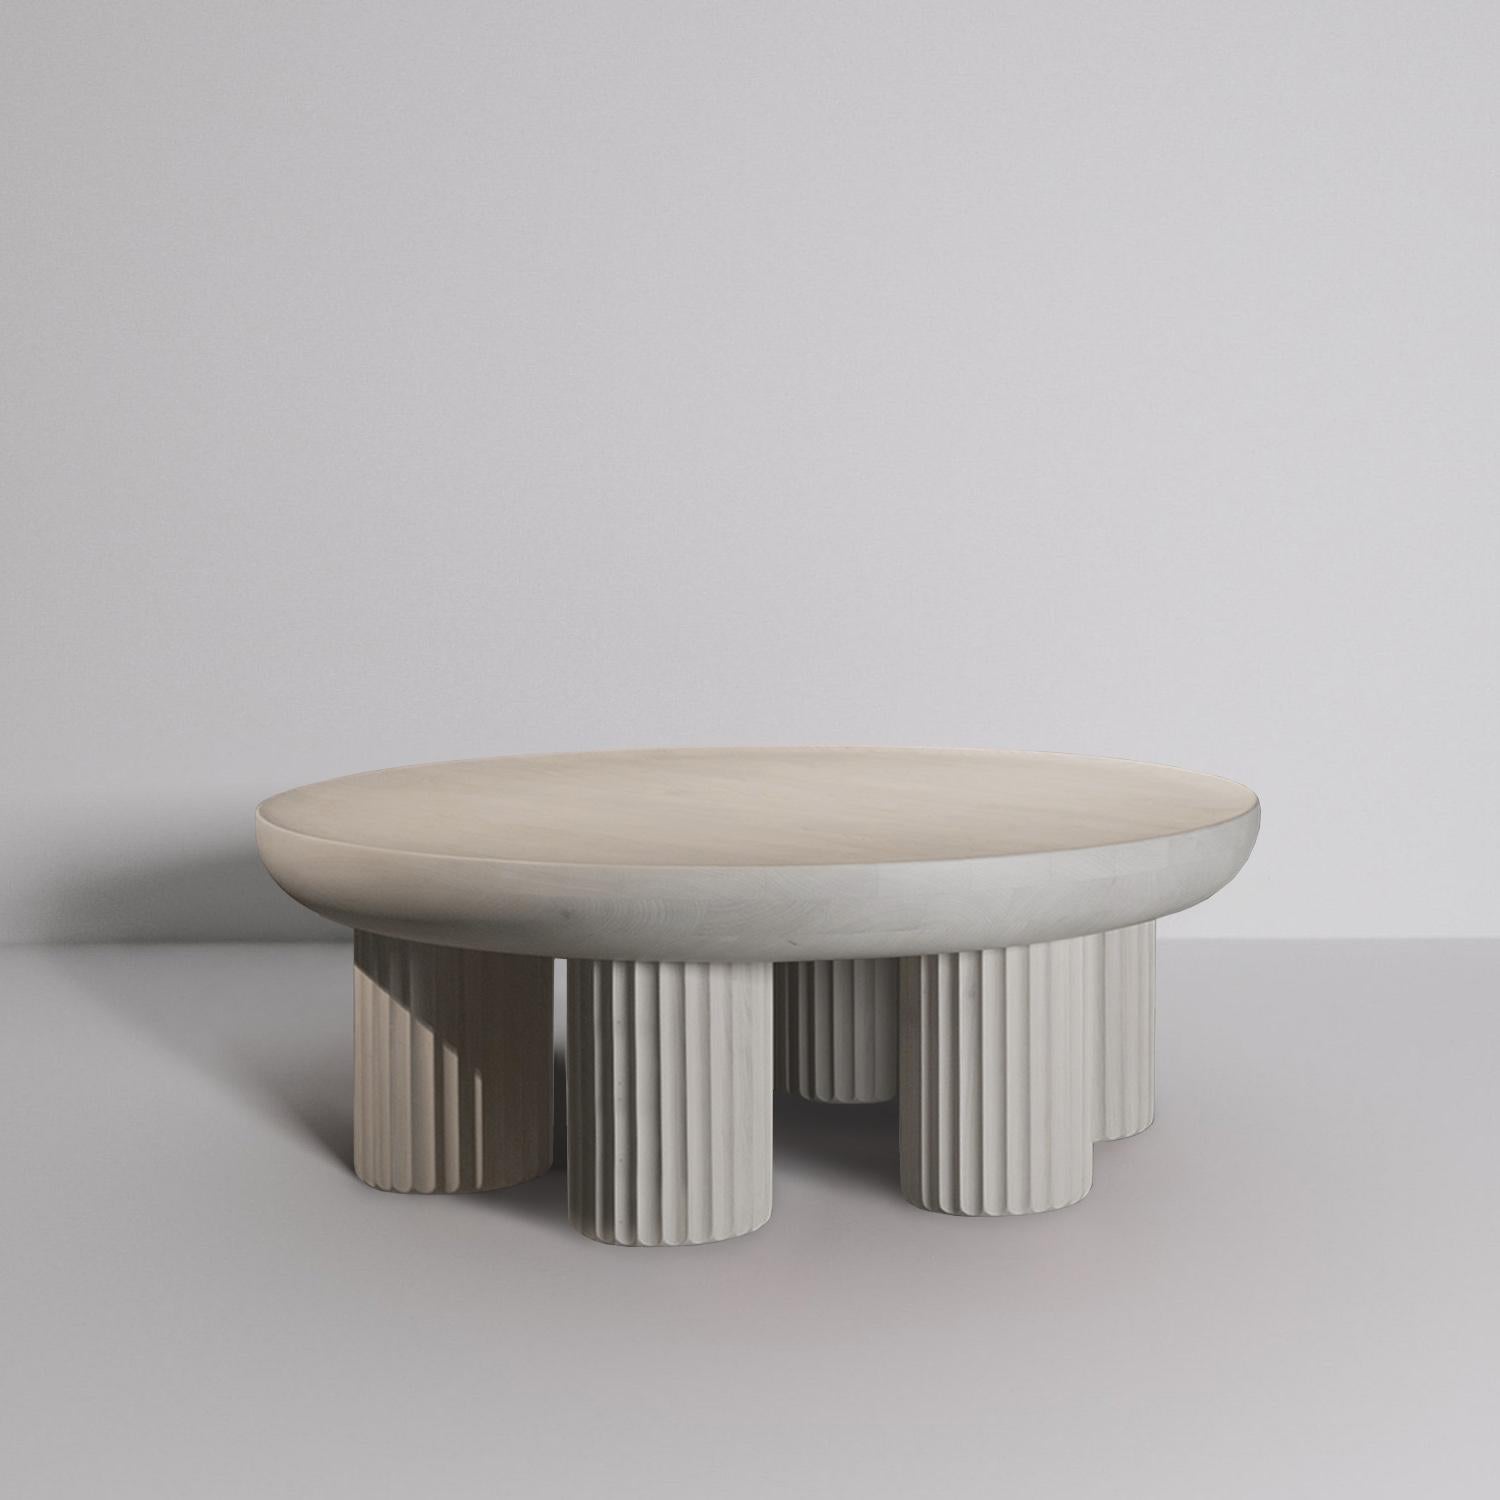 The presented coffee tables are part of the ECLECTICISM collection, in which the designer pursues the relation between history and the present. Every piece from the collection is loosely inspired by a particular style or a movement from the past,